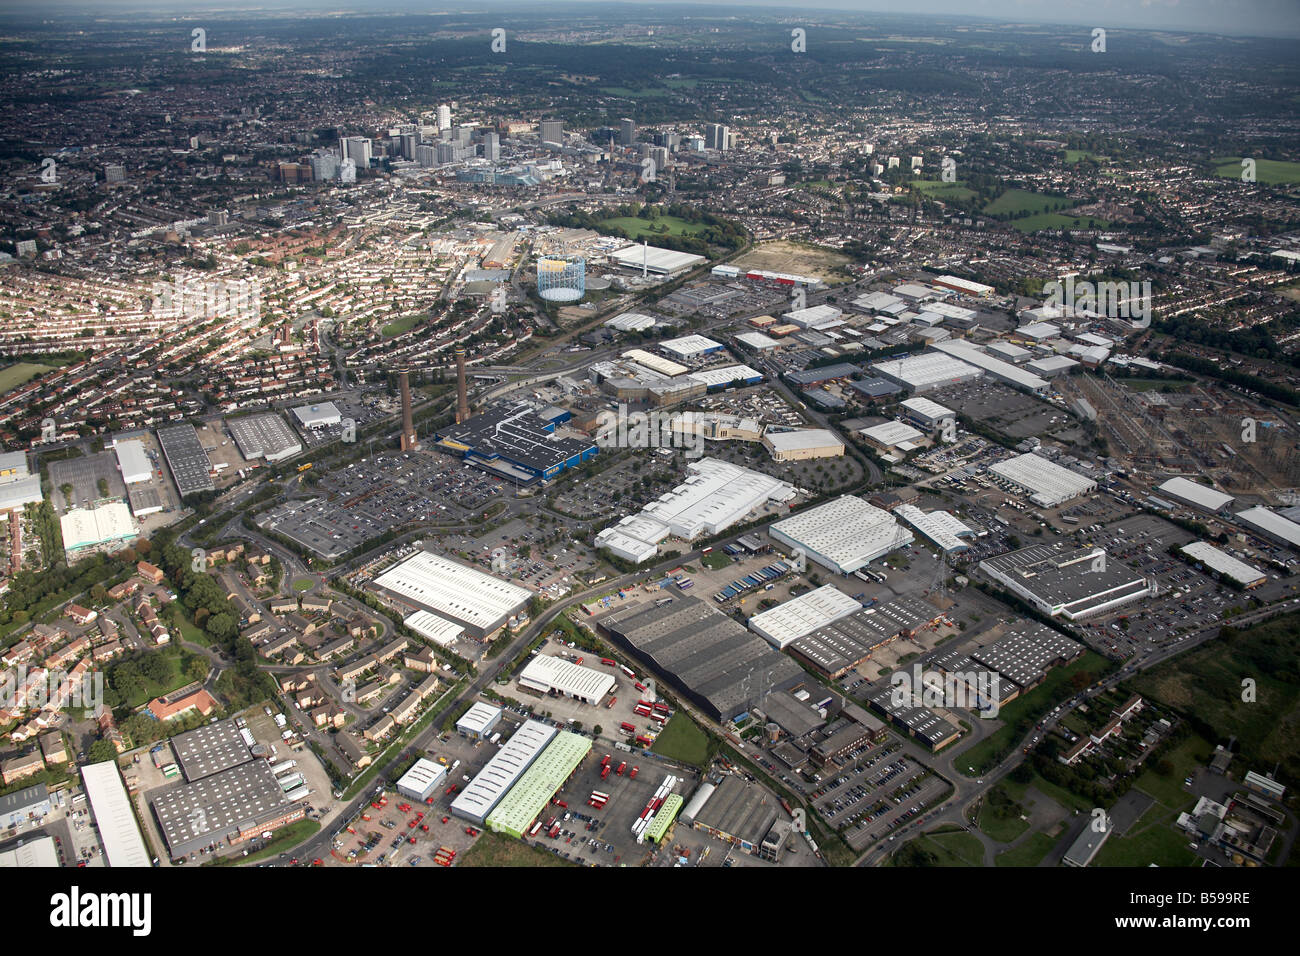 Aerial view south east industrial estates trading and business parks suburban houses Beddington Waddon Croydon Greater London UK Stock Photo